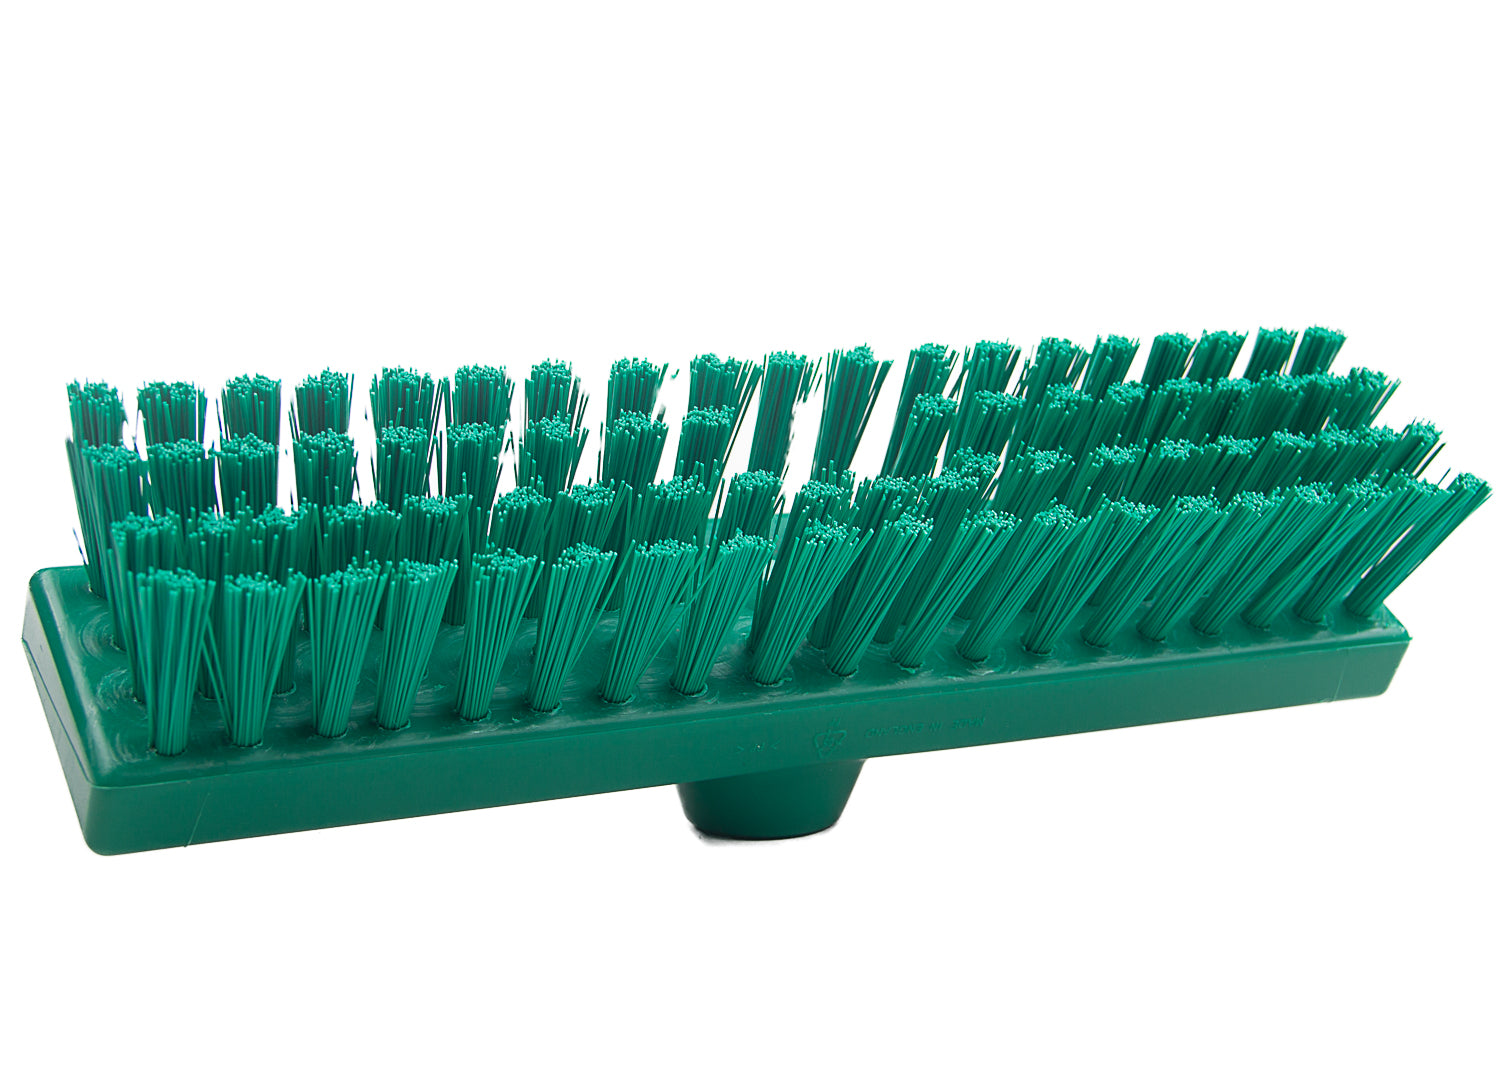 showing the bristles of our extra stiff brush head